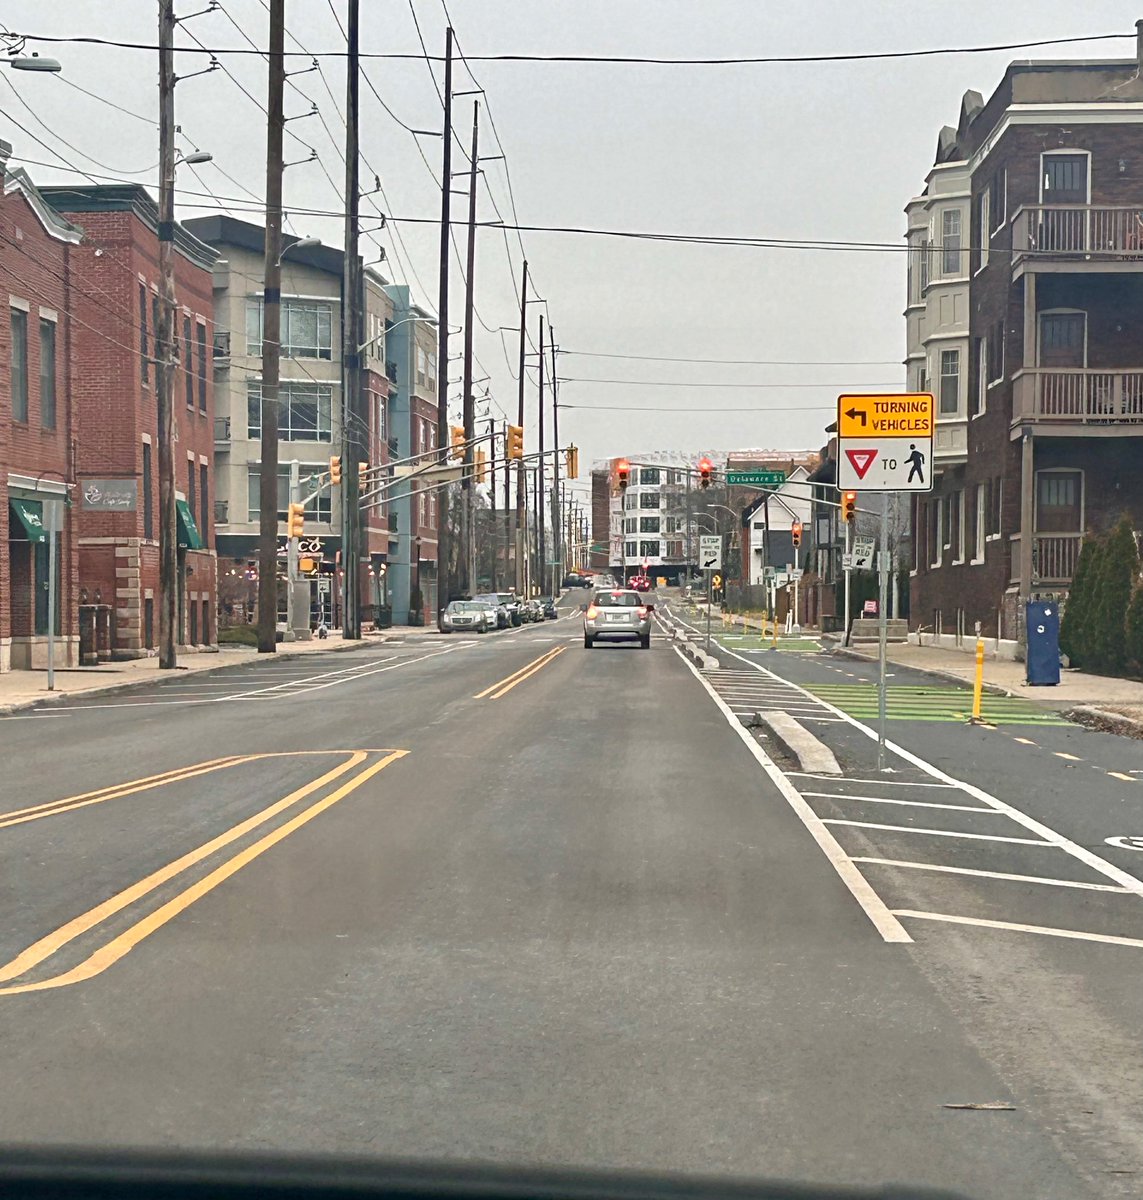 With a new cycletrack and apartment developments, 22nd St on the Near Northside is starting to feel like a real urban corridor